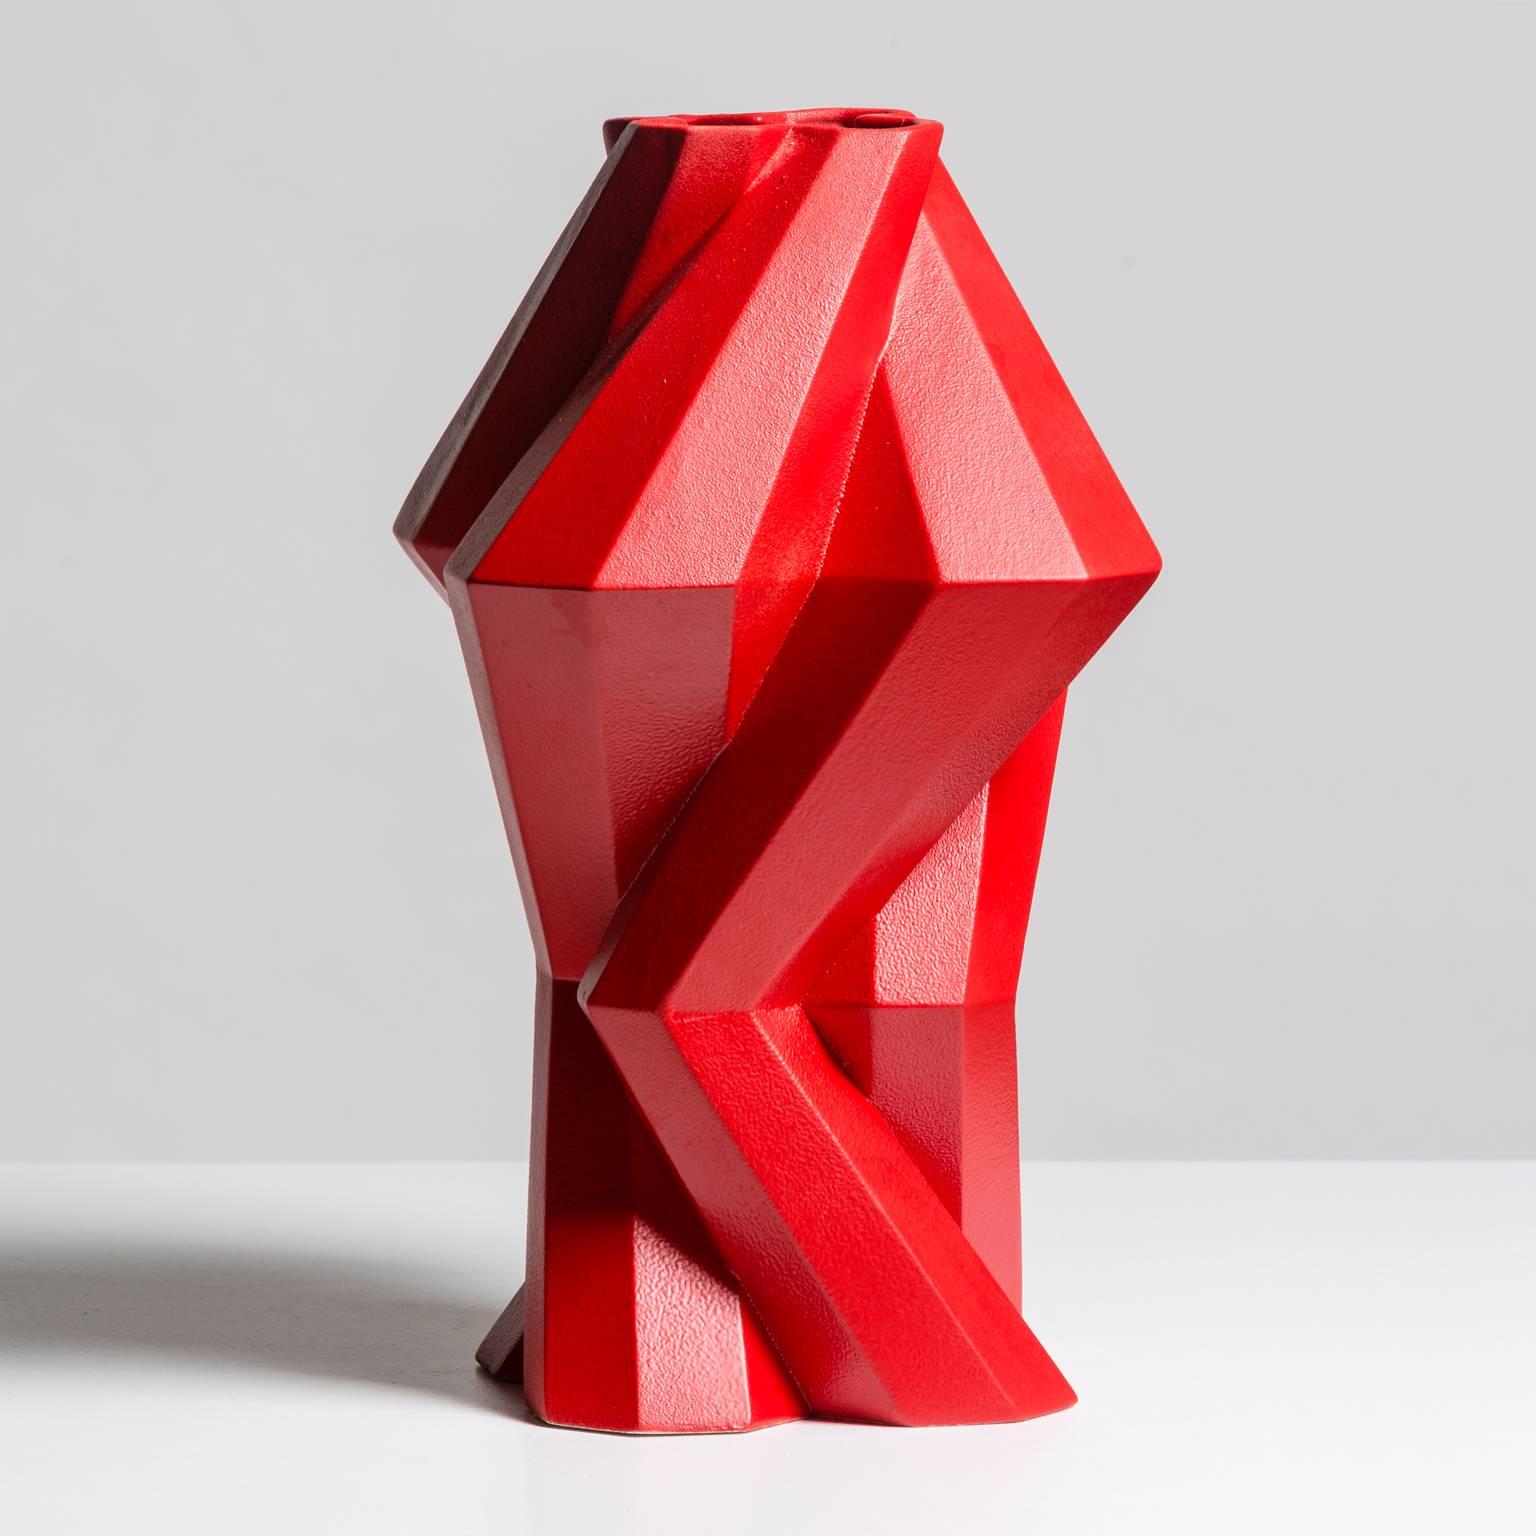 Designer Lara Bohinc explores the marriage of ancient and futuristic form in the new Fortress vase range, which has created a more complex geometric and modern structure from the original inspiration of the octagonal towers at the Diocletian Palace